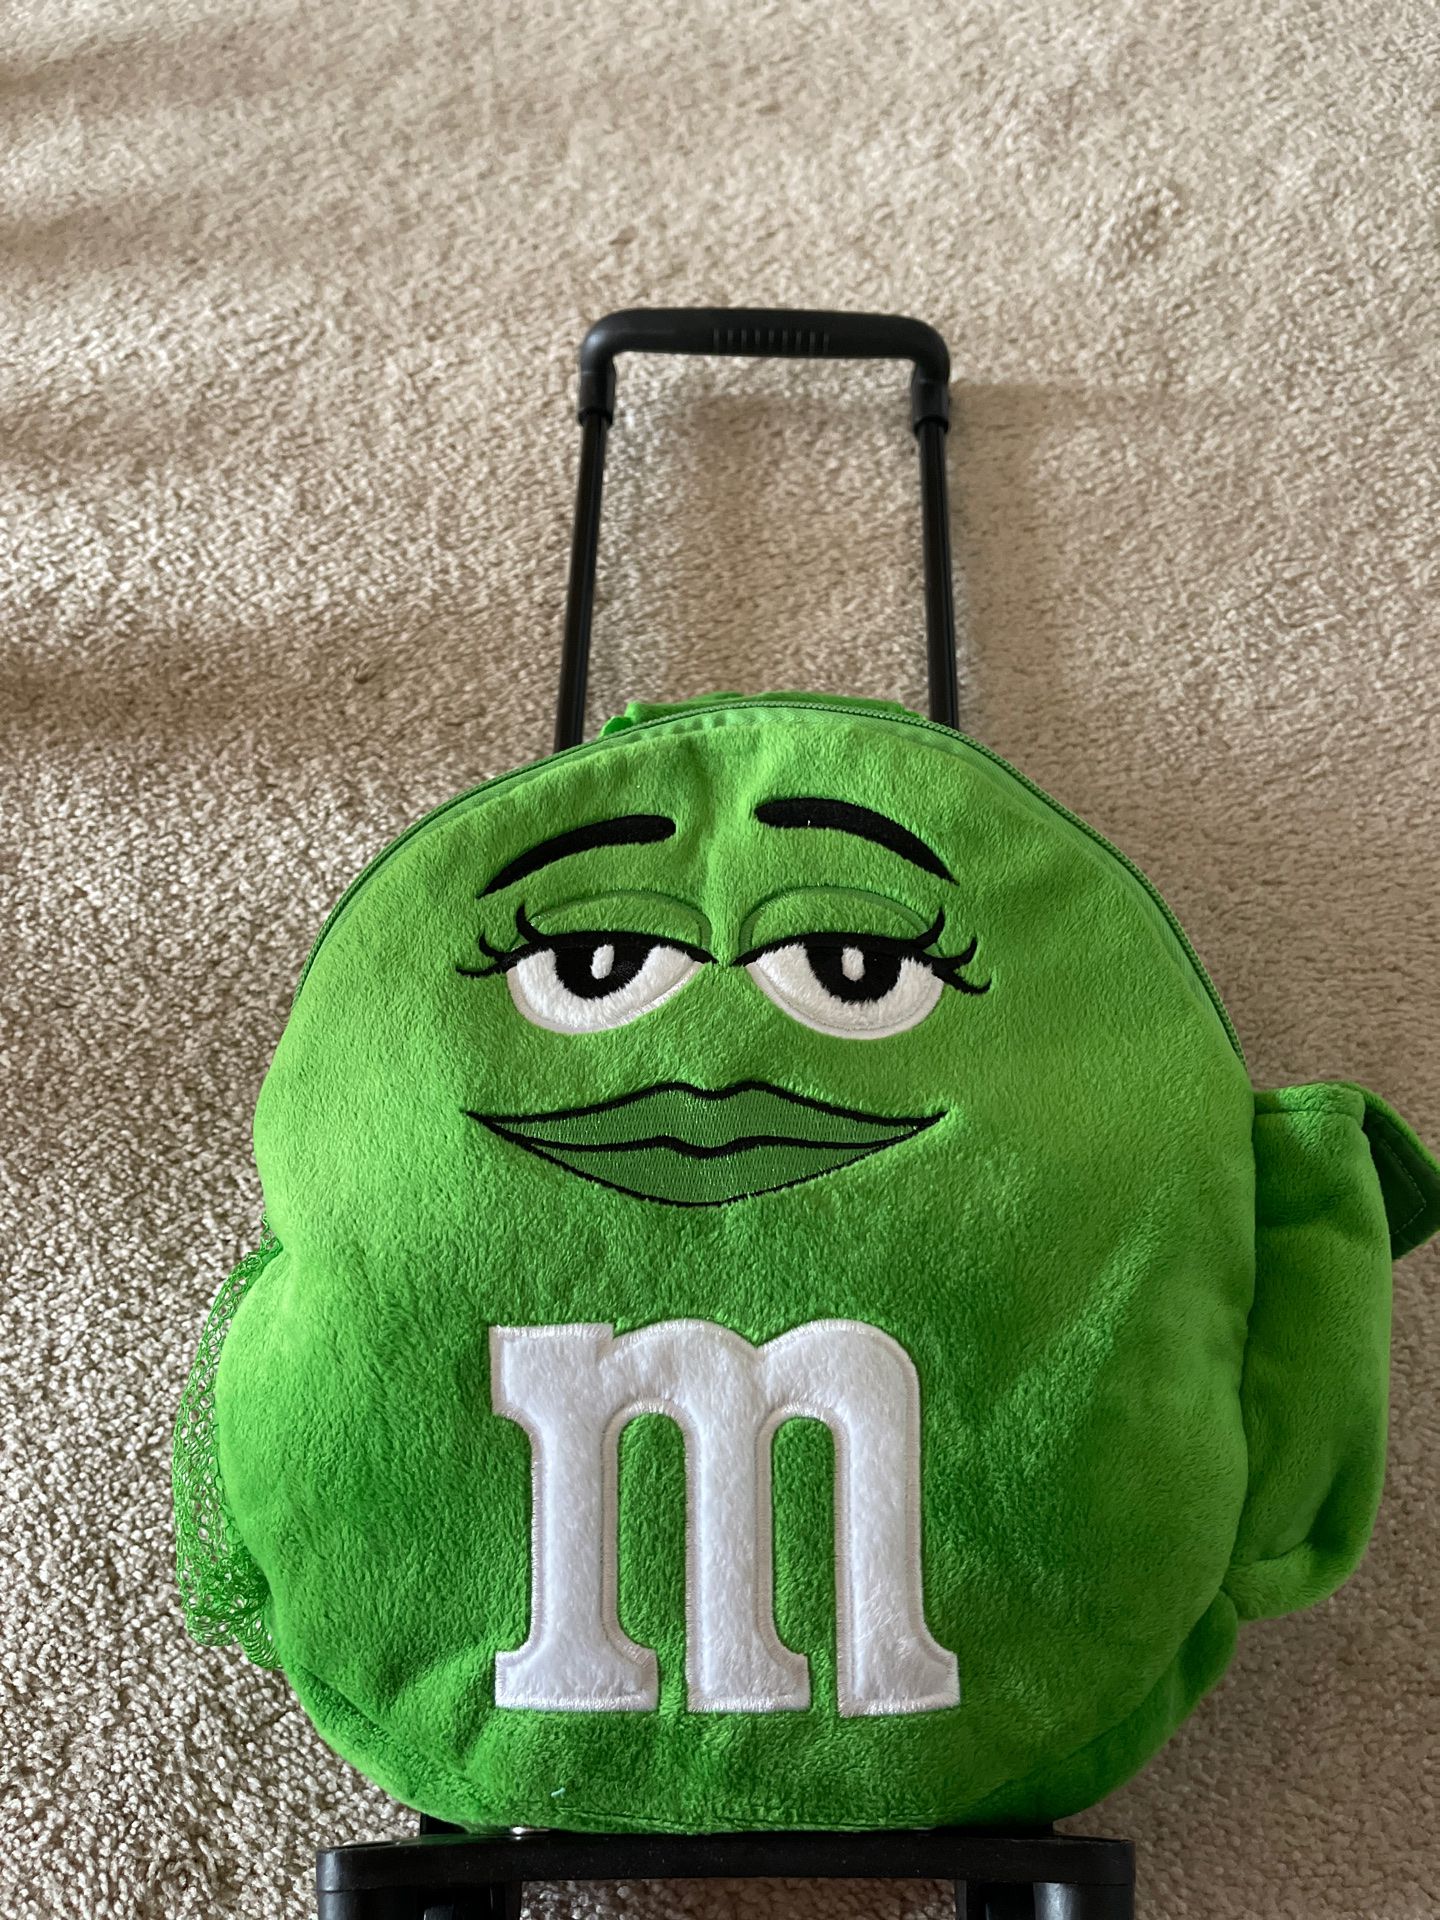 M&M Green Character Plush Backpack Trolley For Child Bag for Sale in  Bolingbrook, IL - OfferUp